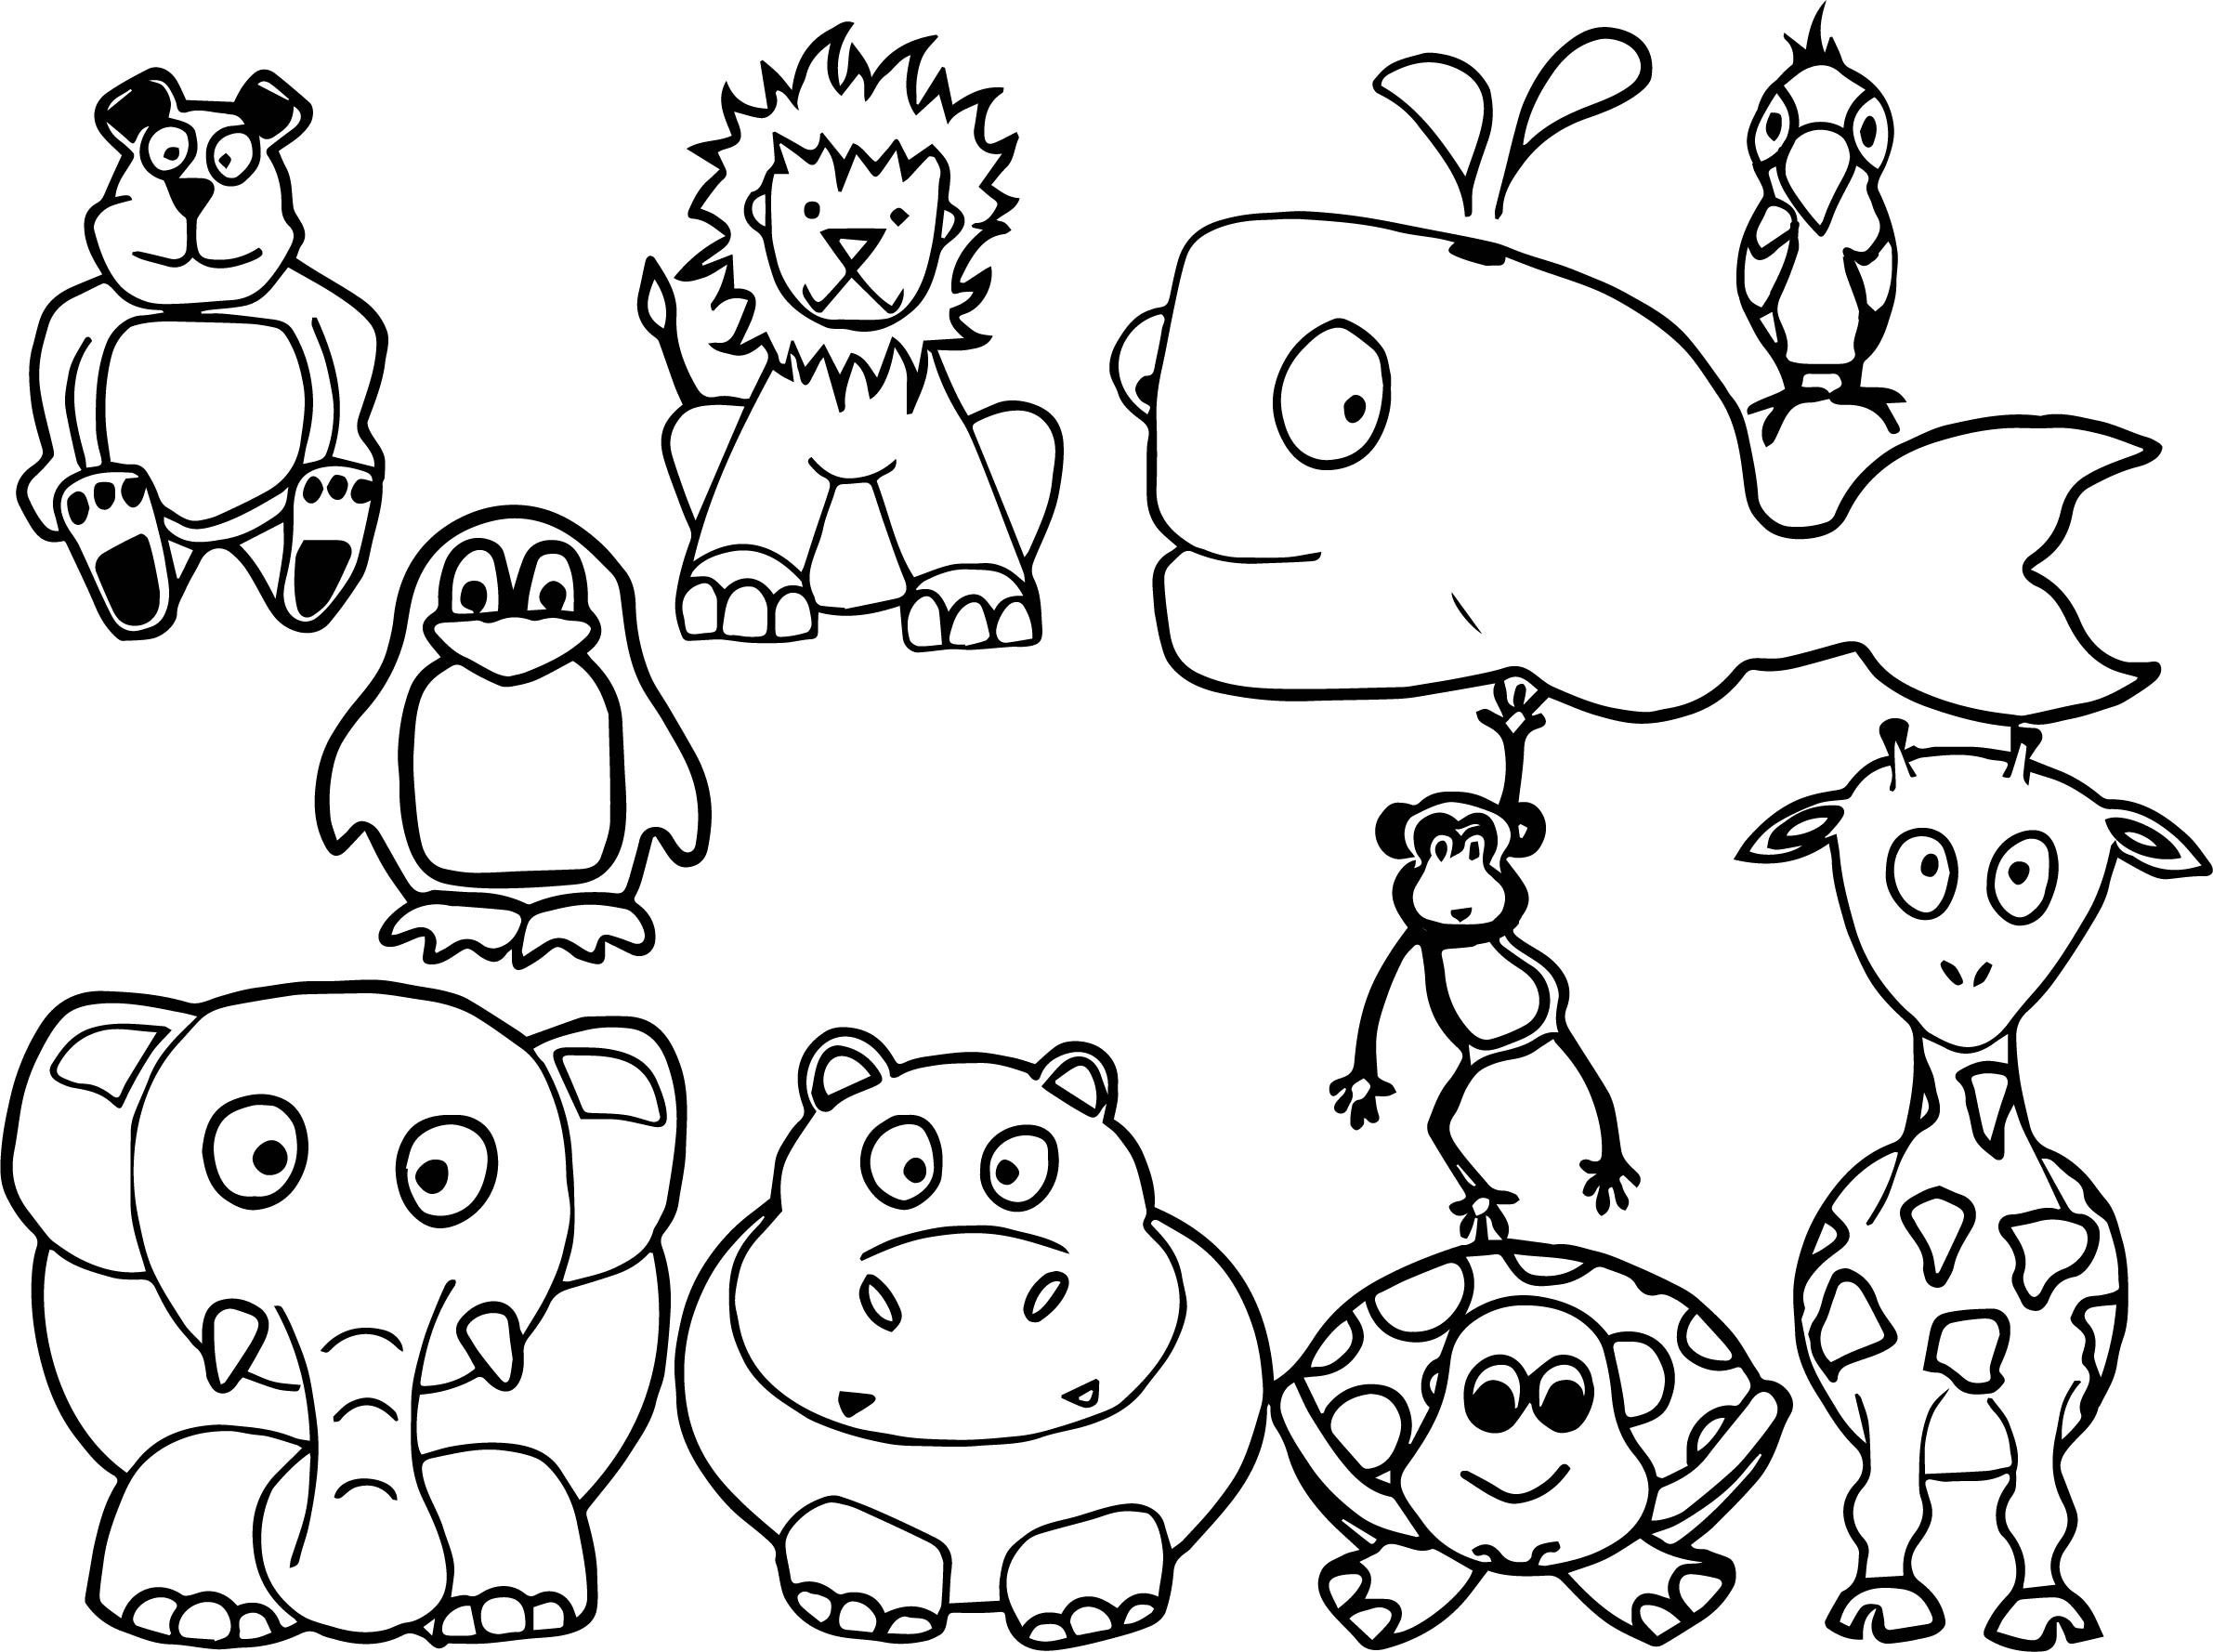 the-best-ideas-for-kids-coloring-pages-animals-home-family-style